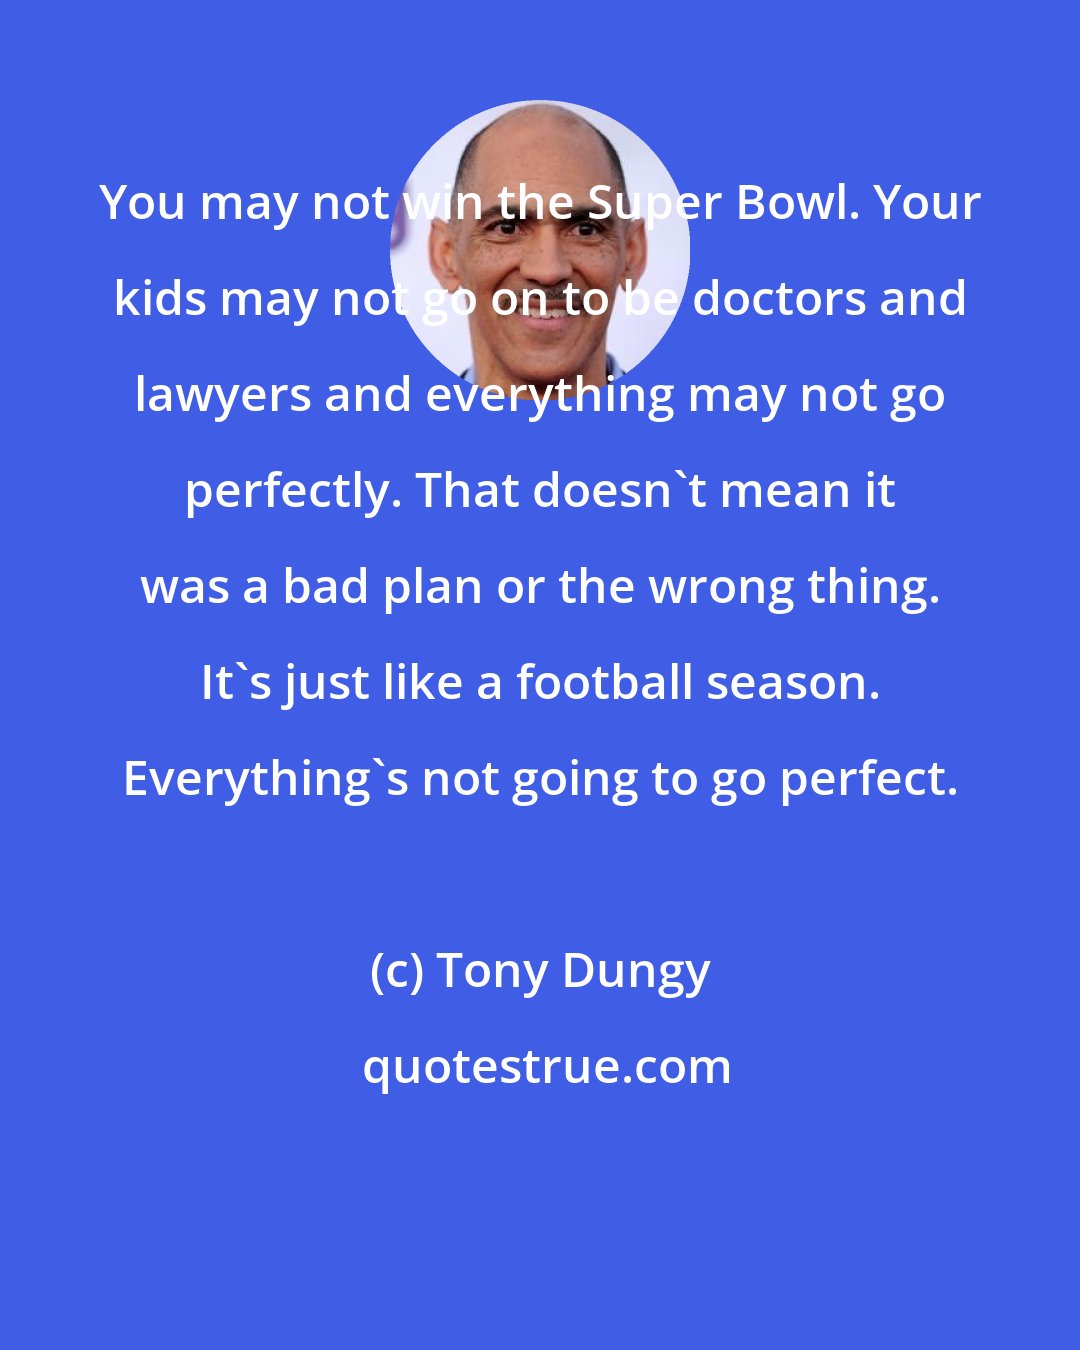 Tony Dungy: You may not win the Super Bowl. Your kids may not go on to be doctors and lawyers and everything may not go perfectly. That doesn't mean it was a bad plan or the wrong thing. It's just like a football season. Everything's not going to go perfect.